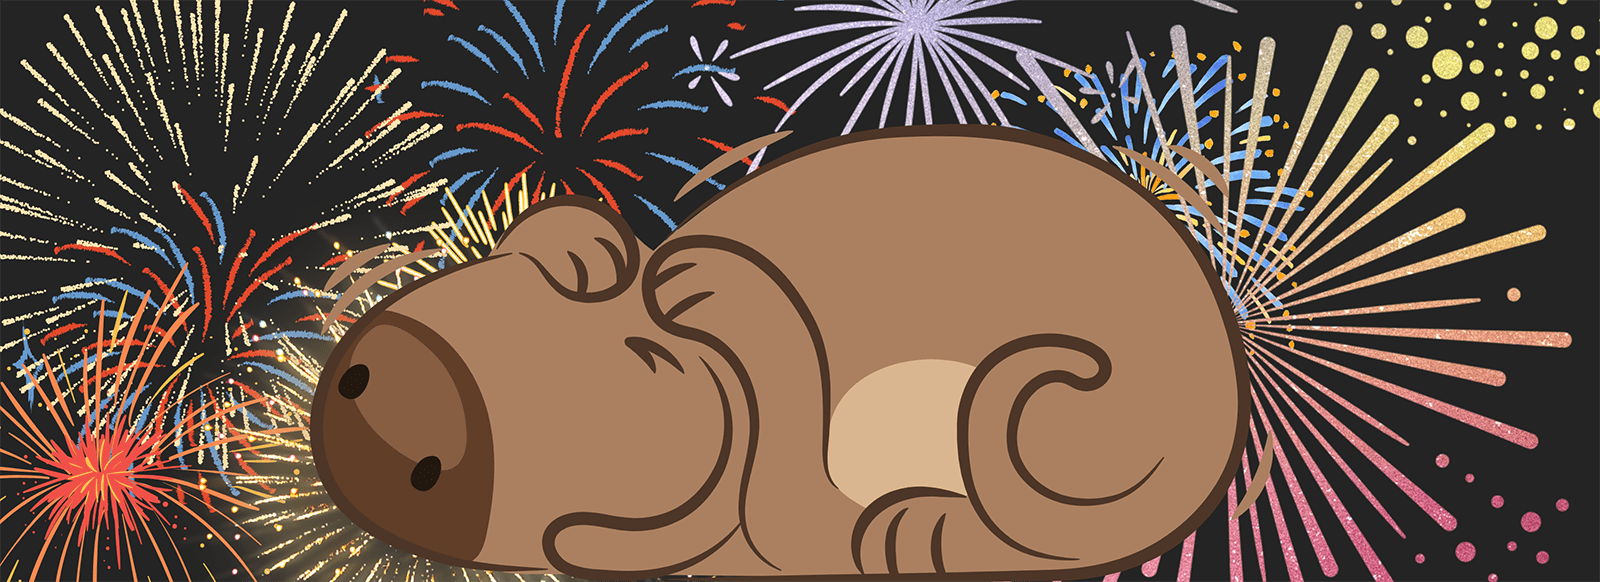 A cartoon image of a dog covering its ears to hide from fireworks